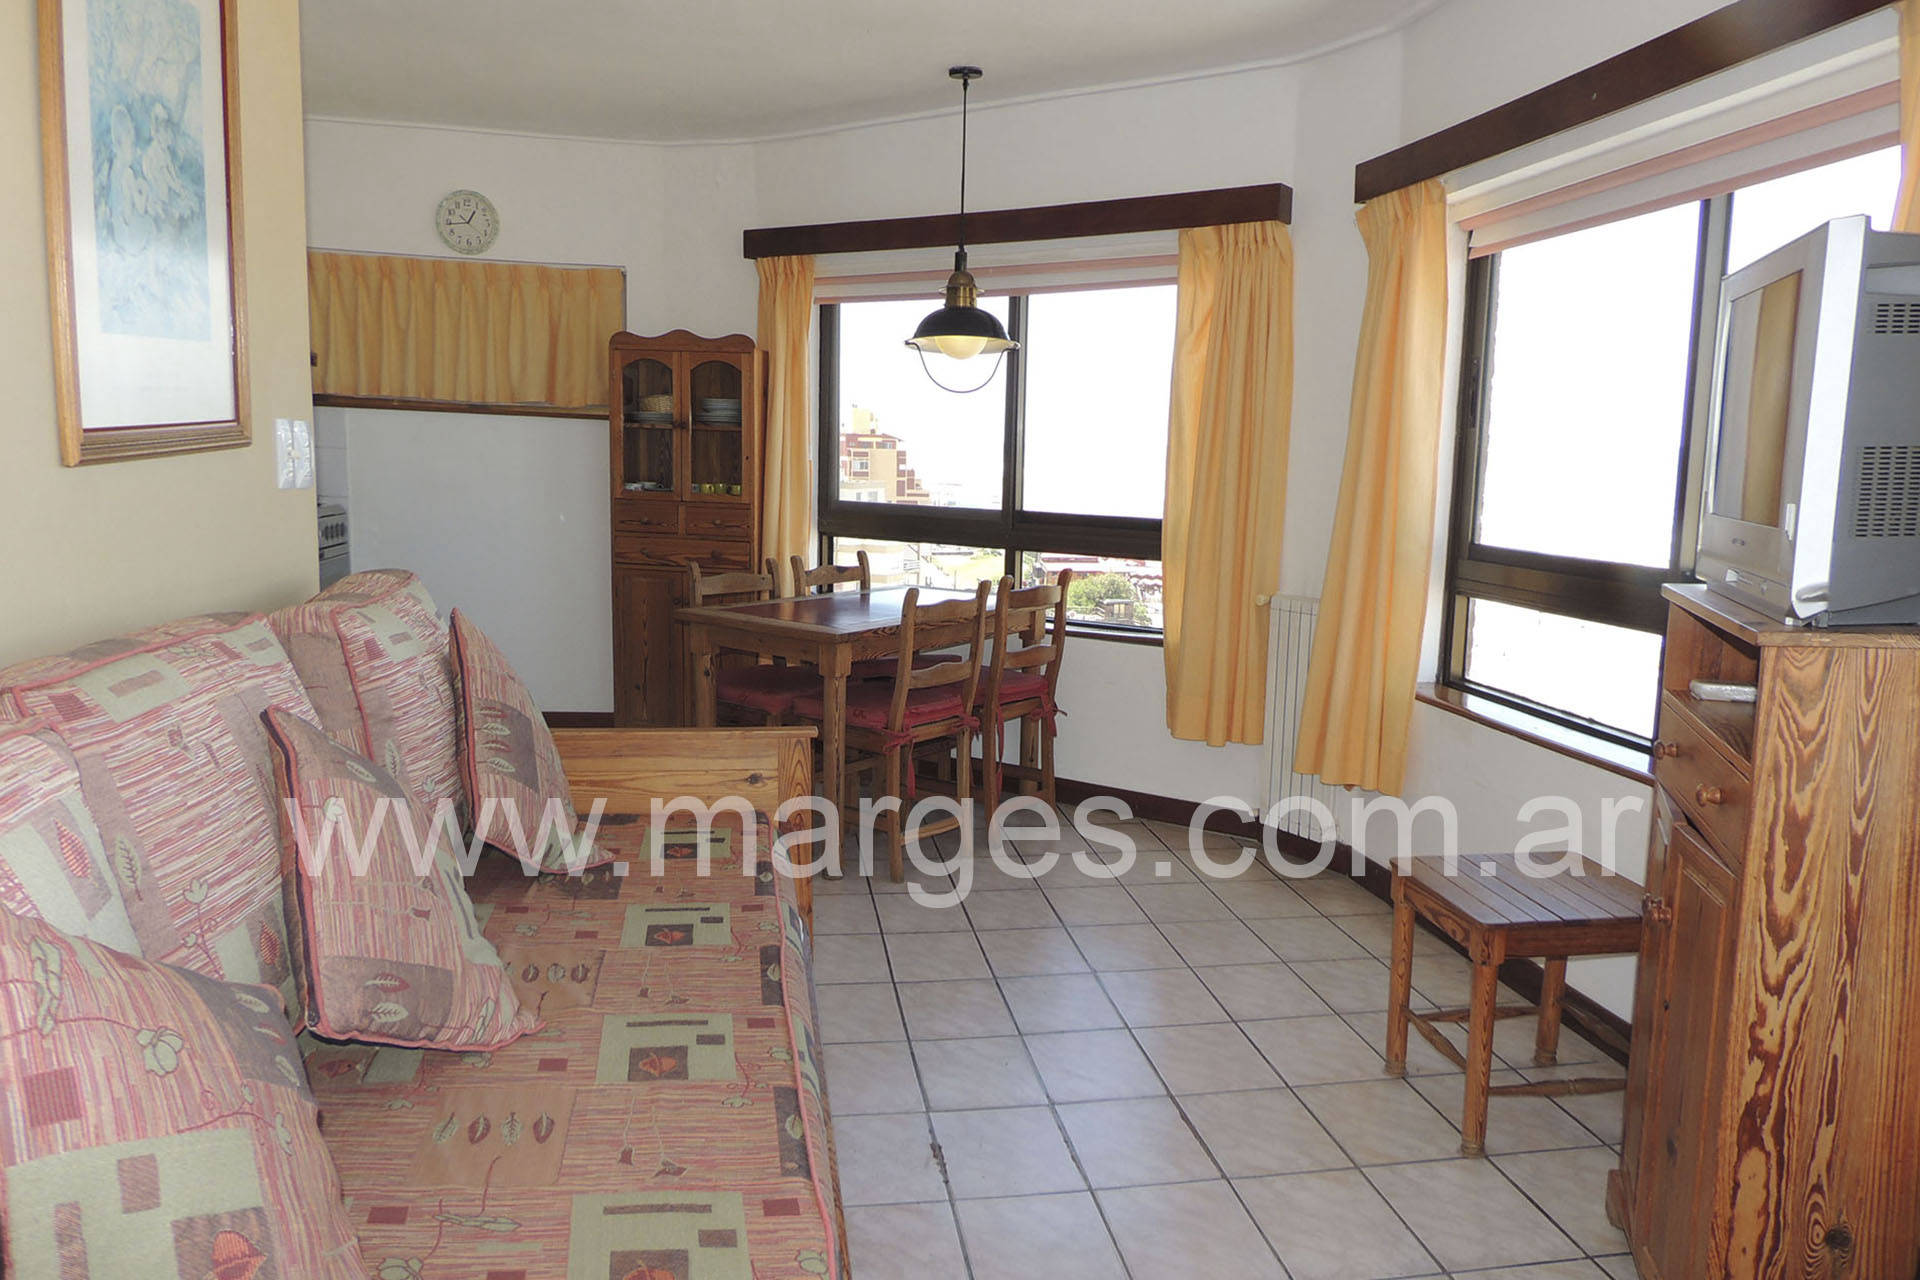 Living Departamento Alquiler Marges Villa Gesell